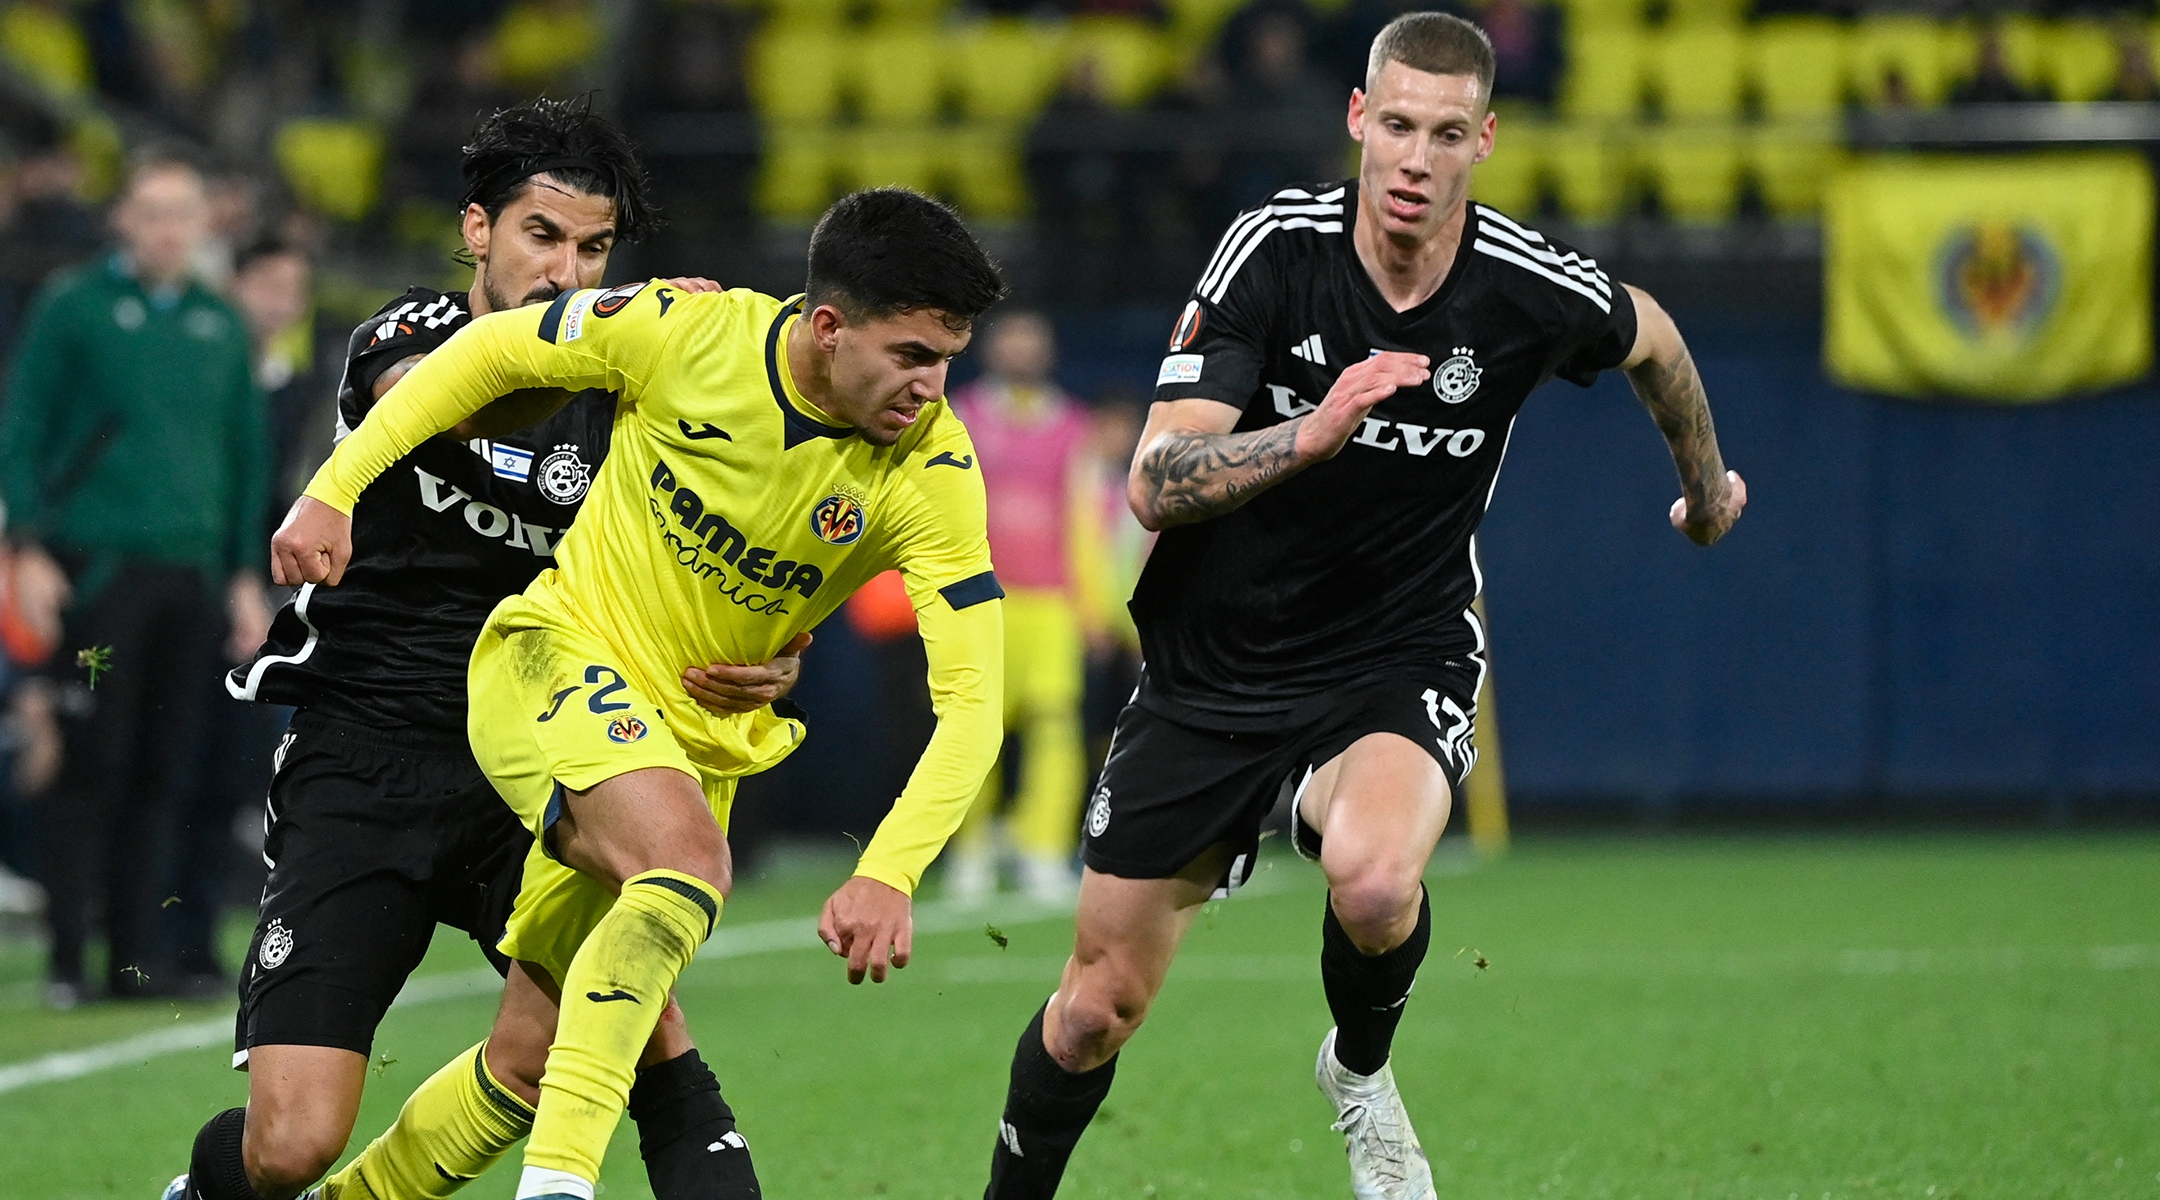 A match between Maccabi Haifa (in black jerseys) and Villarreal CF during the UEFA Europa League first round, Dec. 6, 2023, in Vila-real, Spain. (Jose Jordan/AFP via Getty Images)